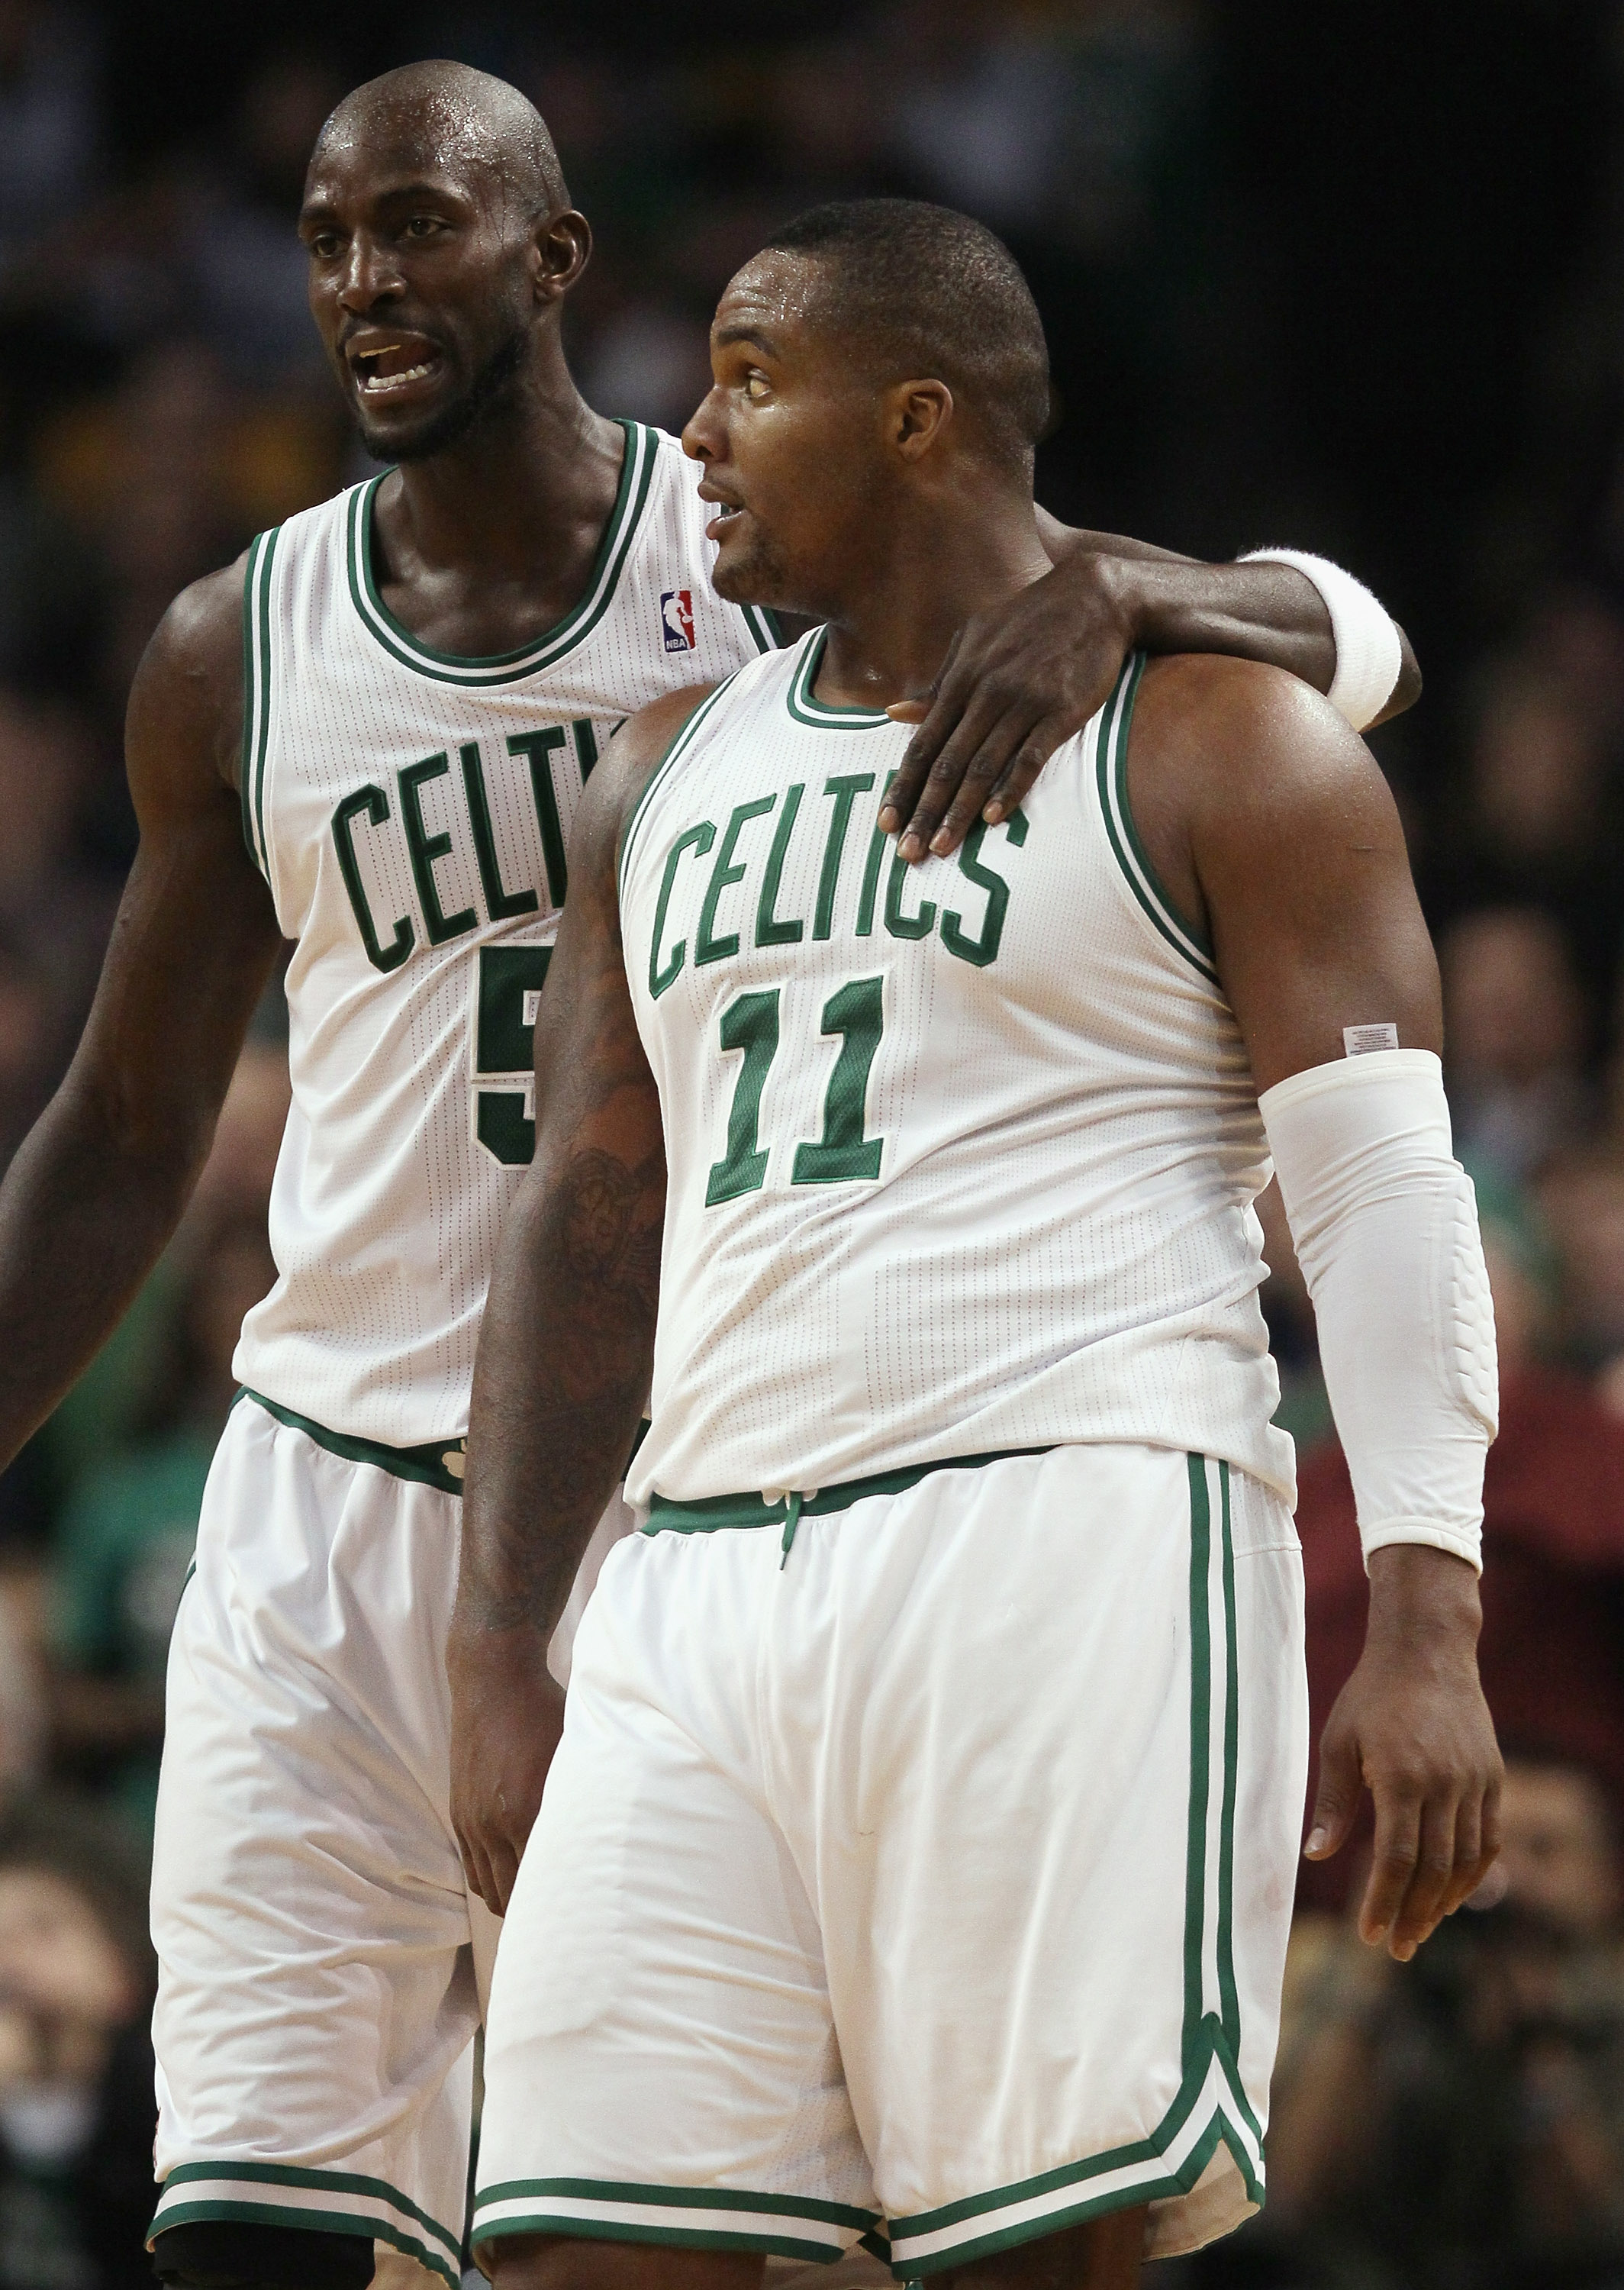 BOSTON, MA - DECEMBER 08:  Kevin Garnett #5 of the Boston Celtics consoles teammate Glen Davis #11 after Davis got in scuffle with Arron Afflalo of the Denver Nuggets on December 8, 2010 at the TD Garden in Boston, Massachusetts. The Celtics defeated the 